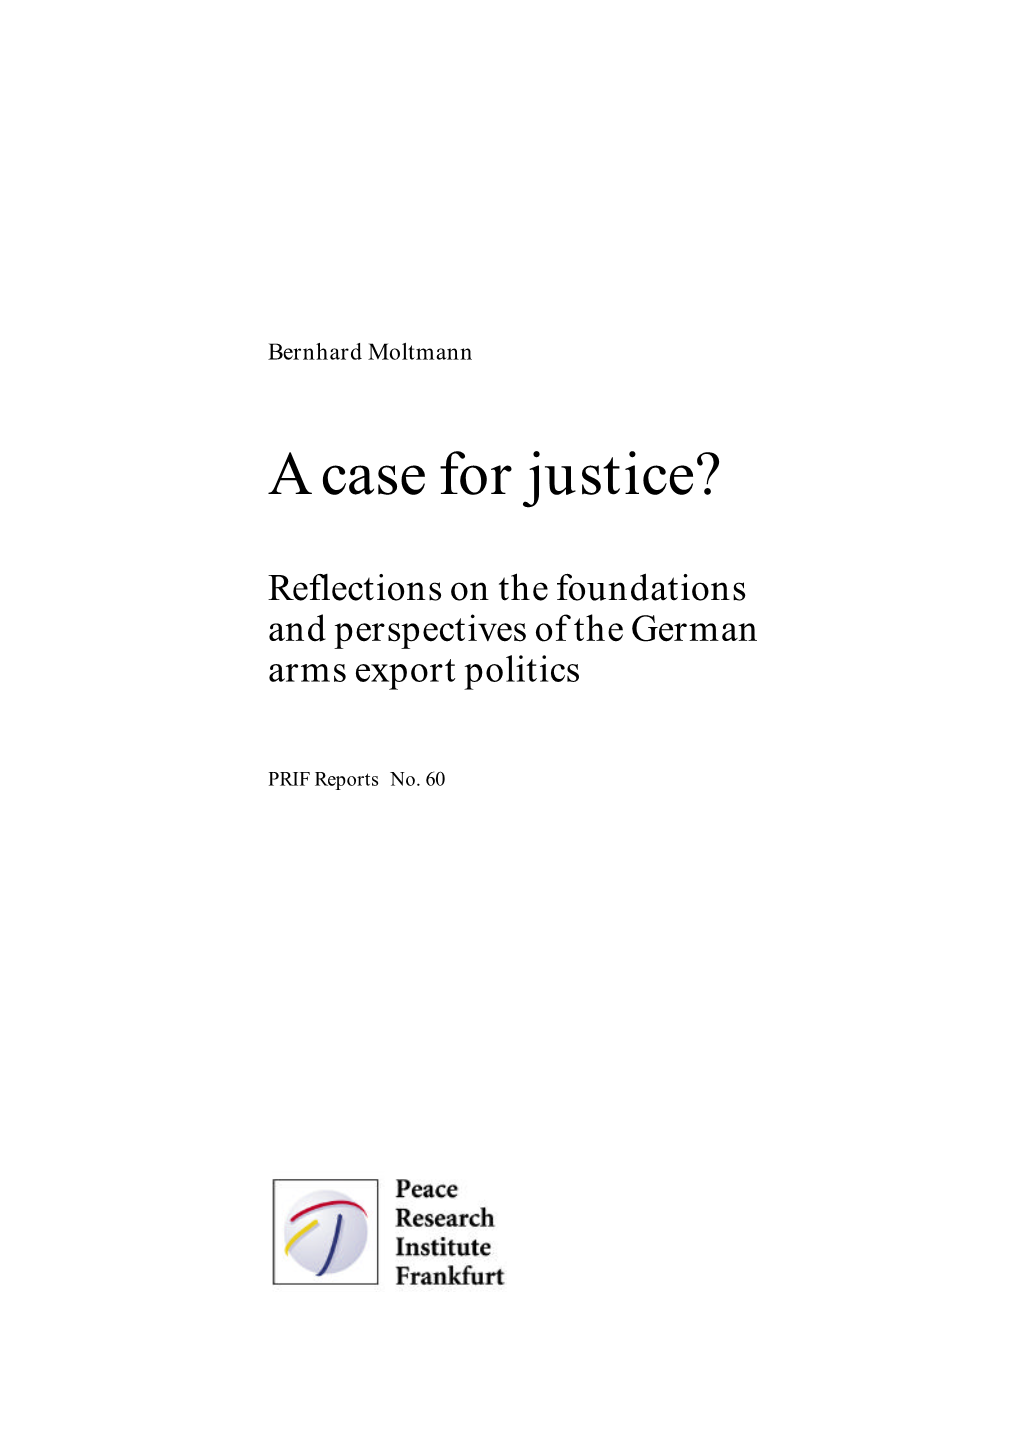 A Case for Justice? Reflections on the Foundations and Perspectives of the German Arms Export Politics